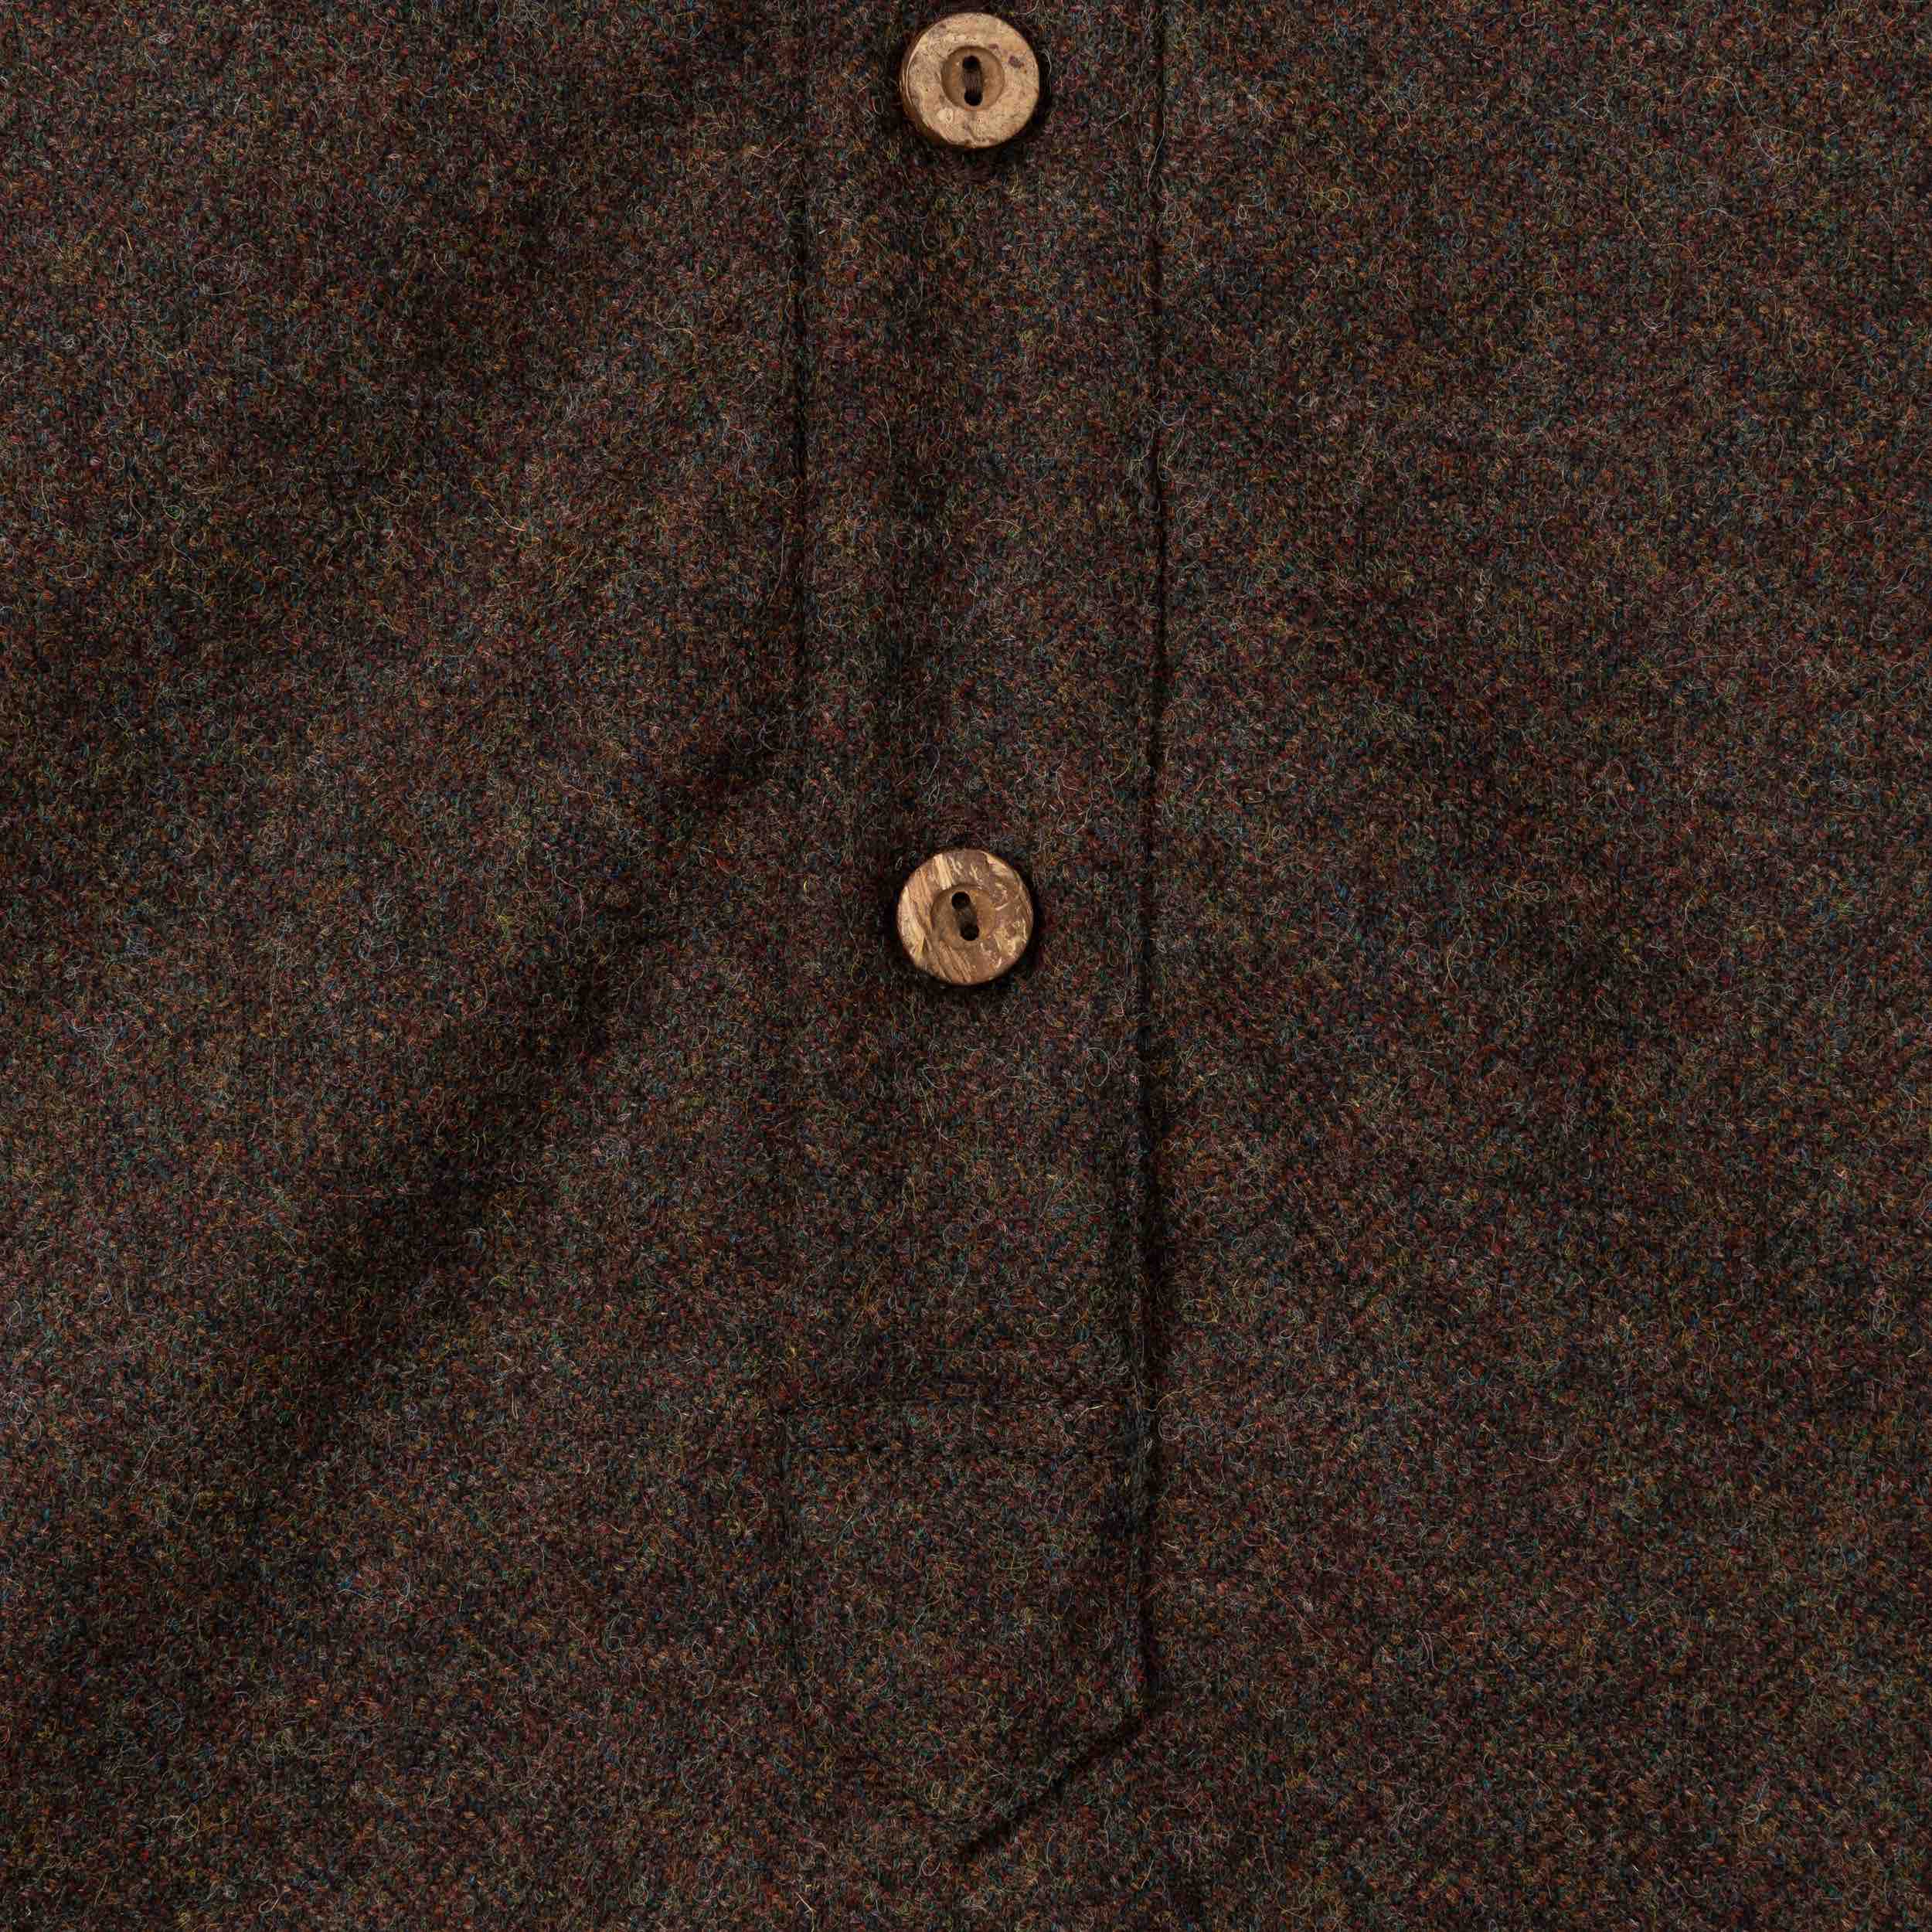 Carrier Company Wool Overshirt in Peat